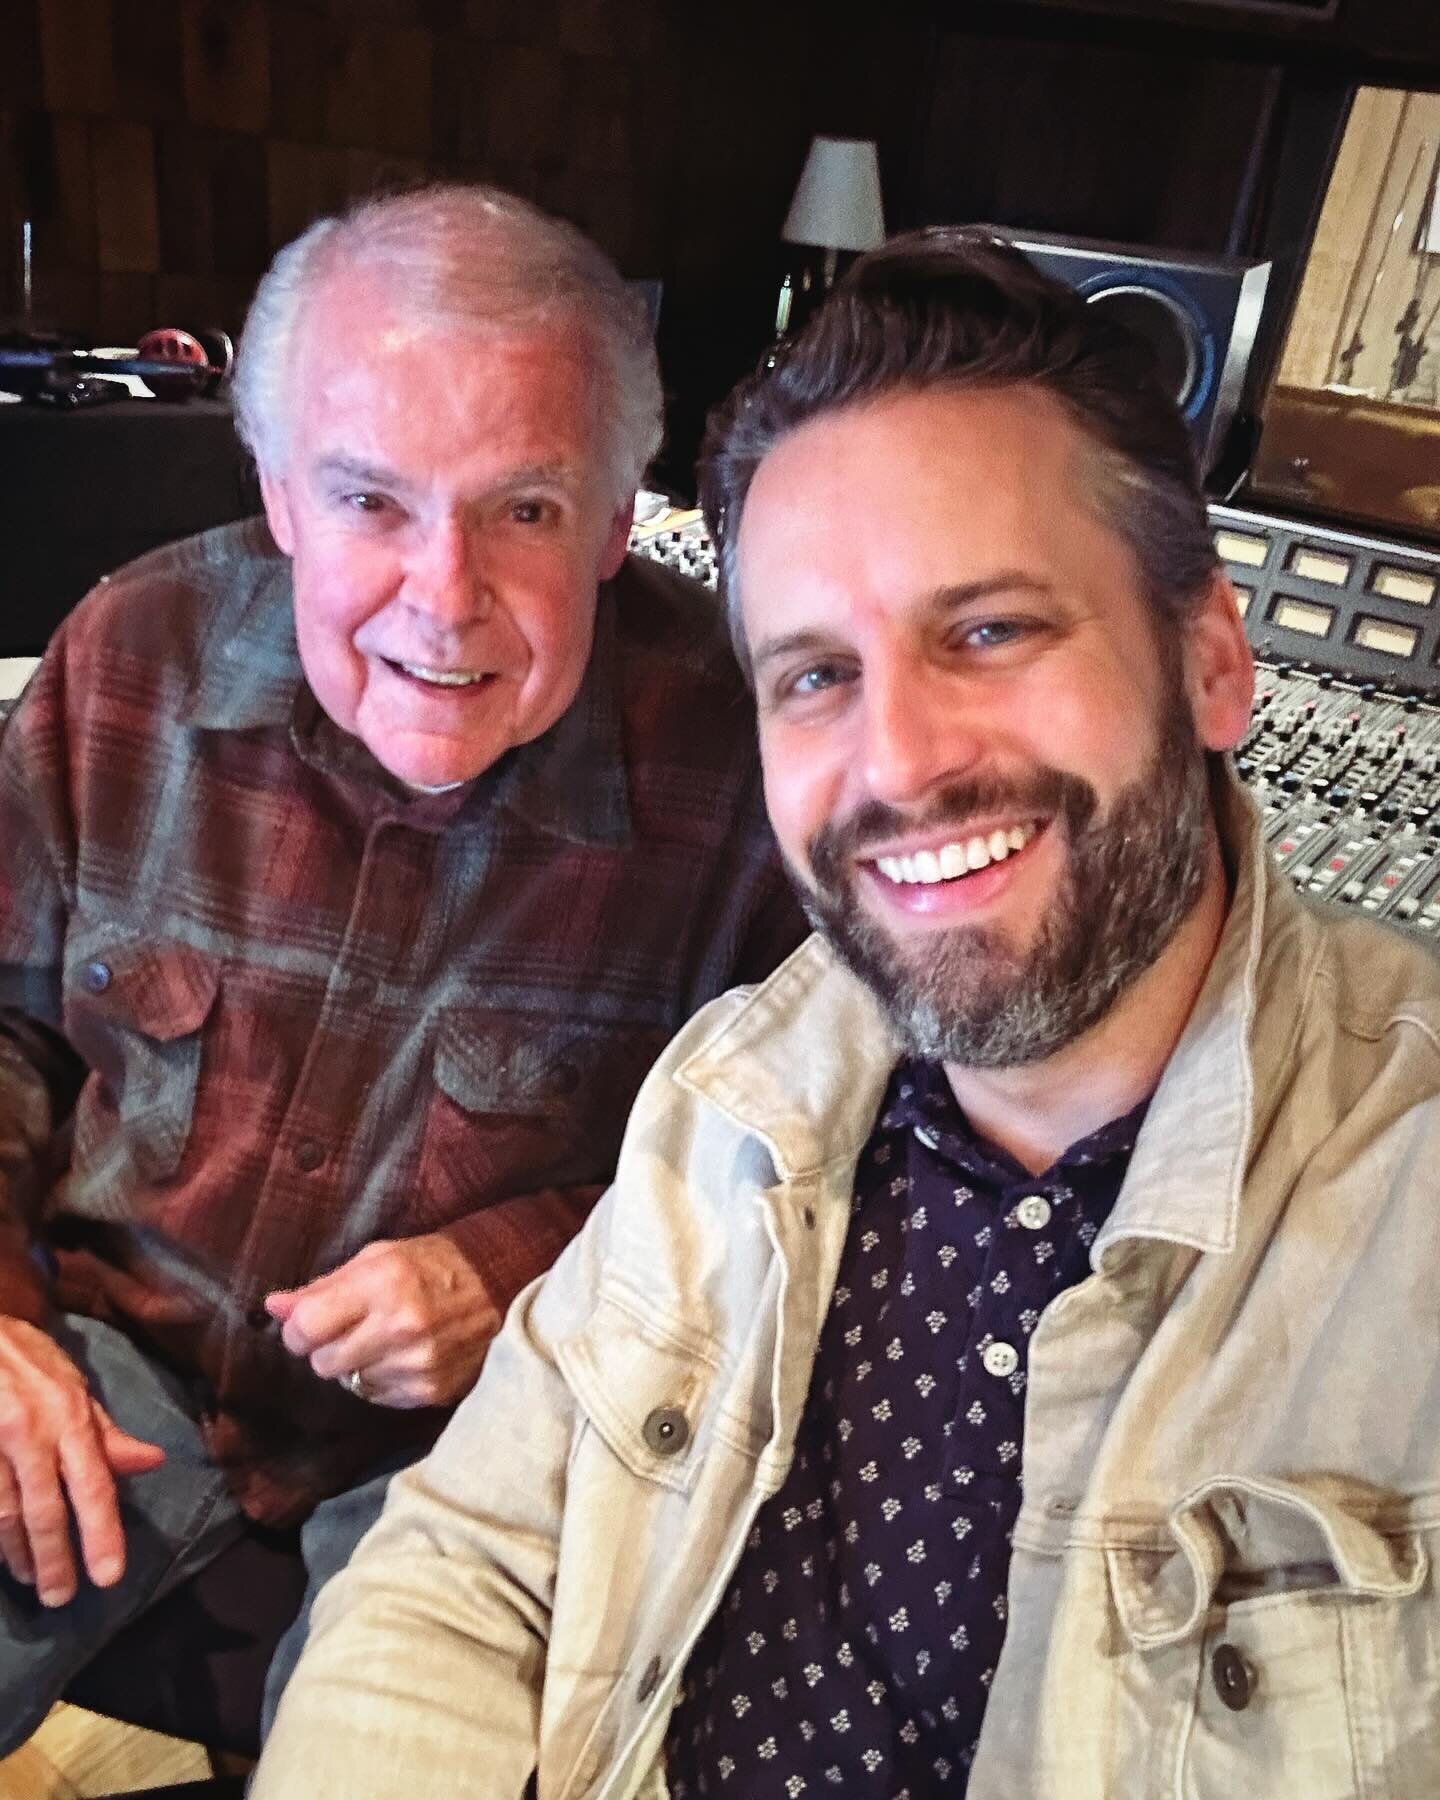 It&rsquo;s always fun recording jingles and ads with the great Don Mosely at Sound of Birmingham! Here&rsquo;s to more fun in the studio in 2024! 🥂 #birmingham #recordingstudio